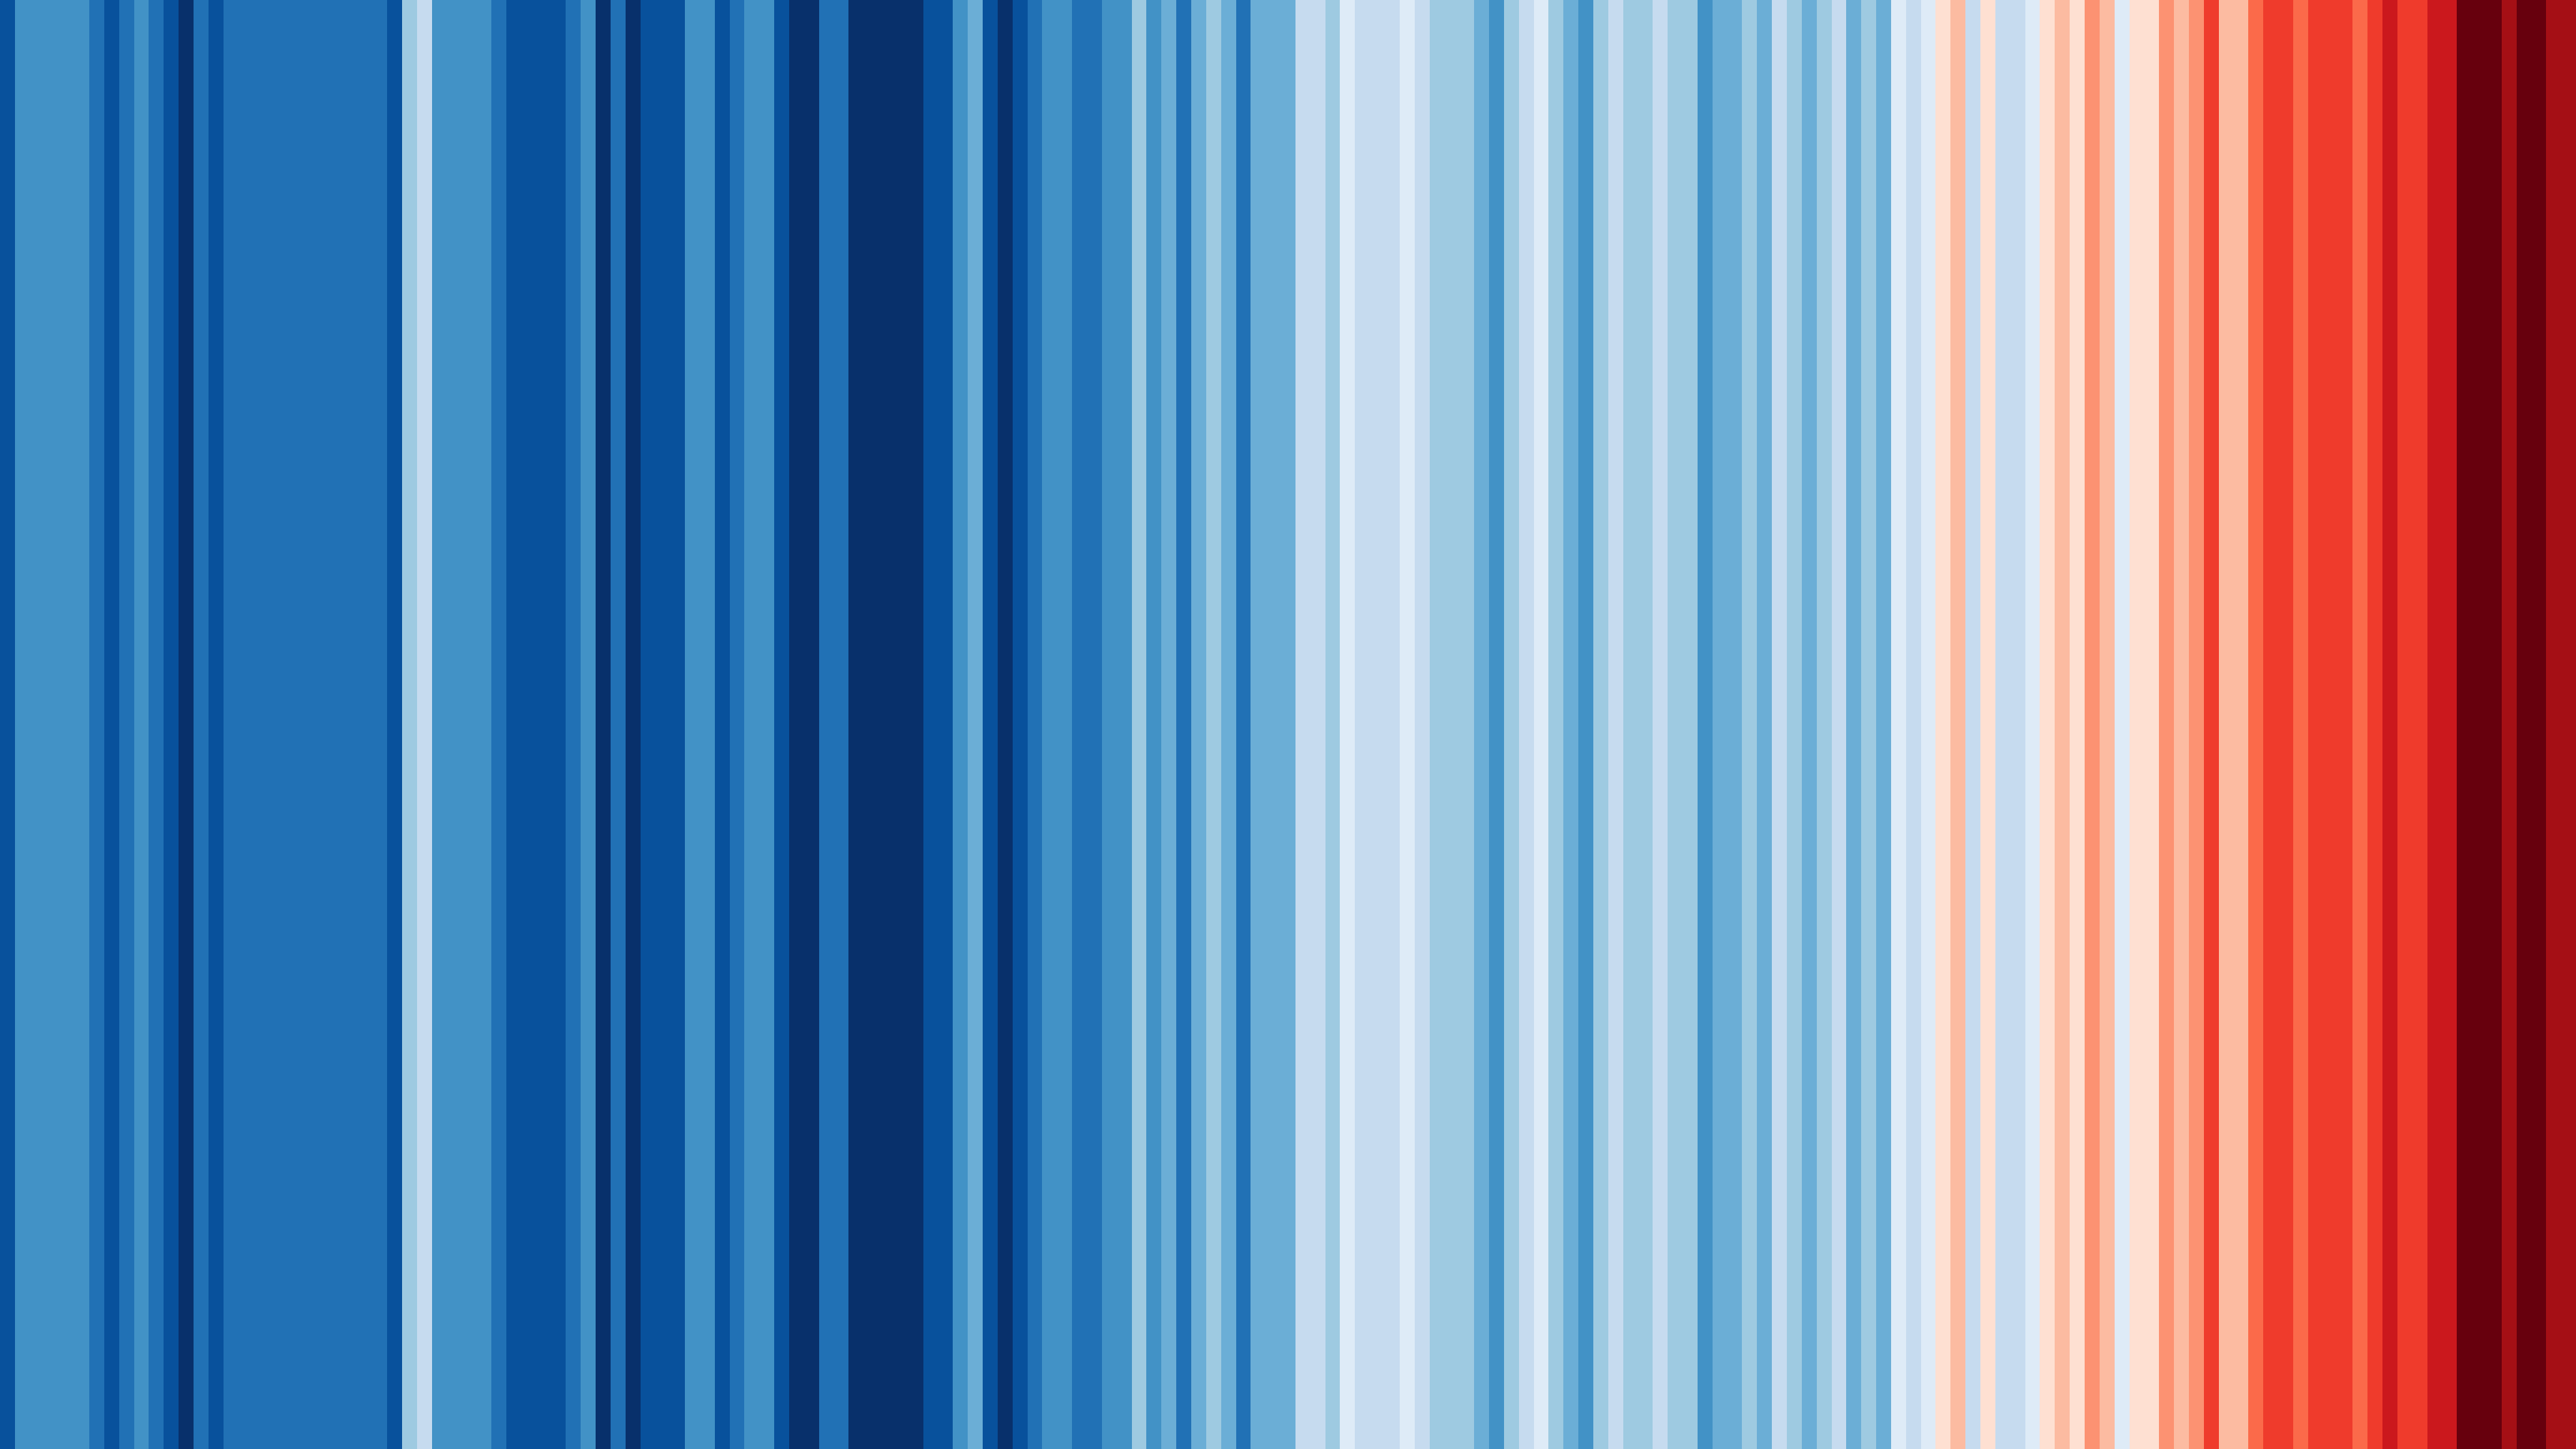 Climate Stripes, global warming, temperature trend, climate change visualization, climate data representation, environmental impact, climate science, climate patterns, temperature anomalies, climate awareness, data visualization techniques, climate crisis, Earth's climate, climate communication, climate advocacy, visual storytelling, climate science communication, climate statistics, climate action, sustainable future, climate awareness campaign, climate trends, climate emergency, ecological balance, weather patterns, climate variability, climate research, climate education, climate visualization tools, climate data interpretation, climate science outreach, atmospheric changes, climate data analysis, temperature graph, climate chart, environmental awareness, sustainable living, climate information design, climate change mitigation, climate adaptation, carbon footprint, greenhouse gas emissions, climate risk assessment, climate policy, climate resilience, global temperature rise, planetary health, climate impact assessment, climate reporting, climate storytelling, scientific communication, Earth's ecosystems, climate science community,